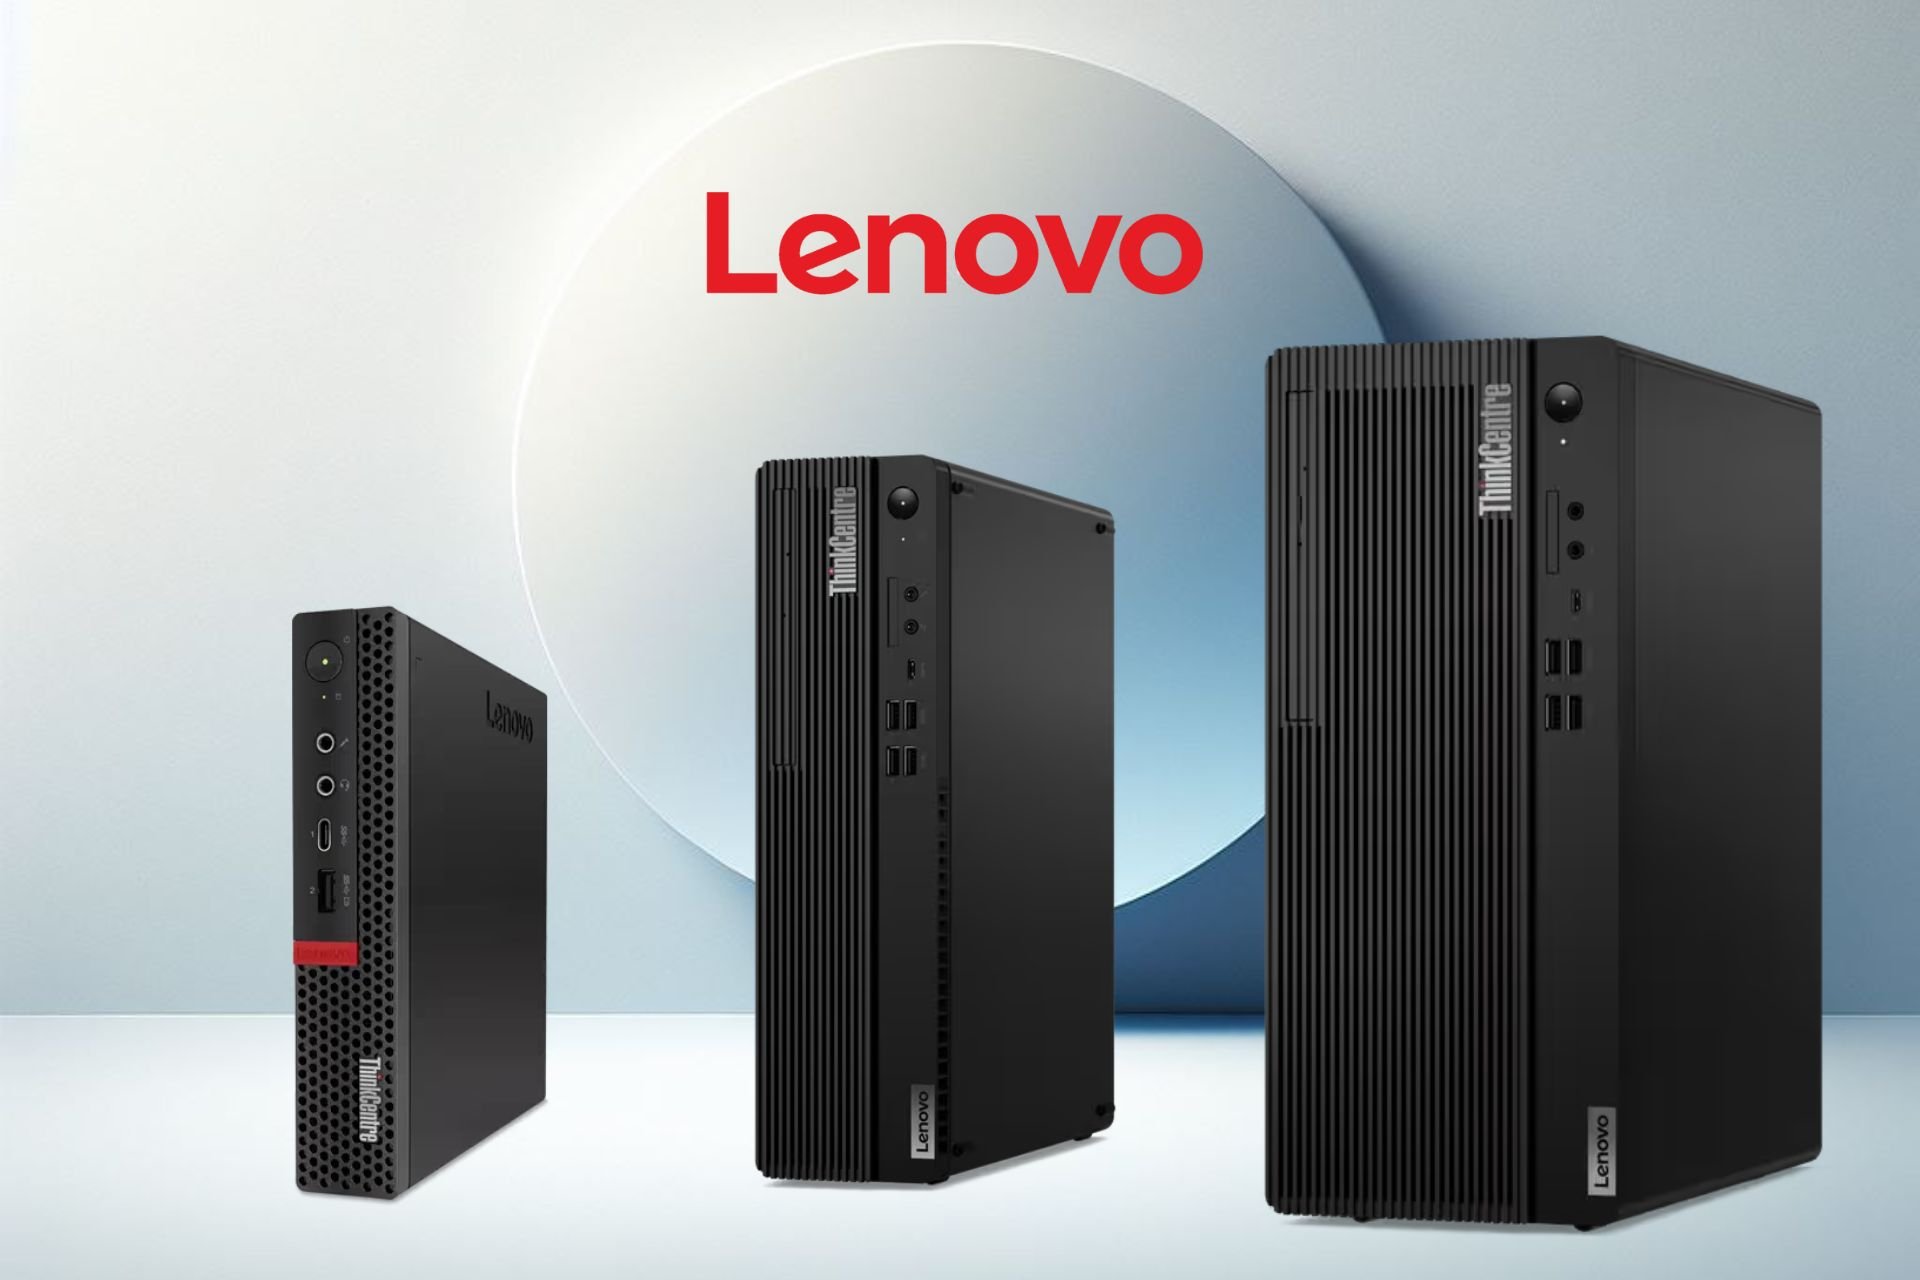 Lenovo brings three new AI PCs powered by the newest AMD chips